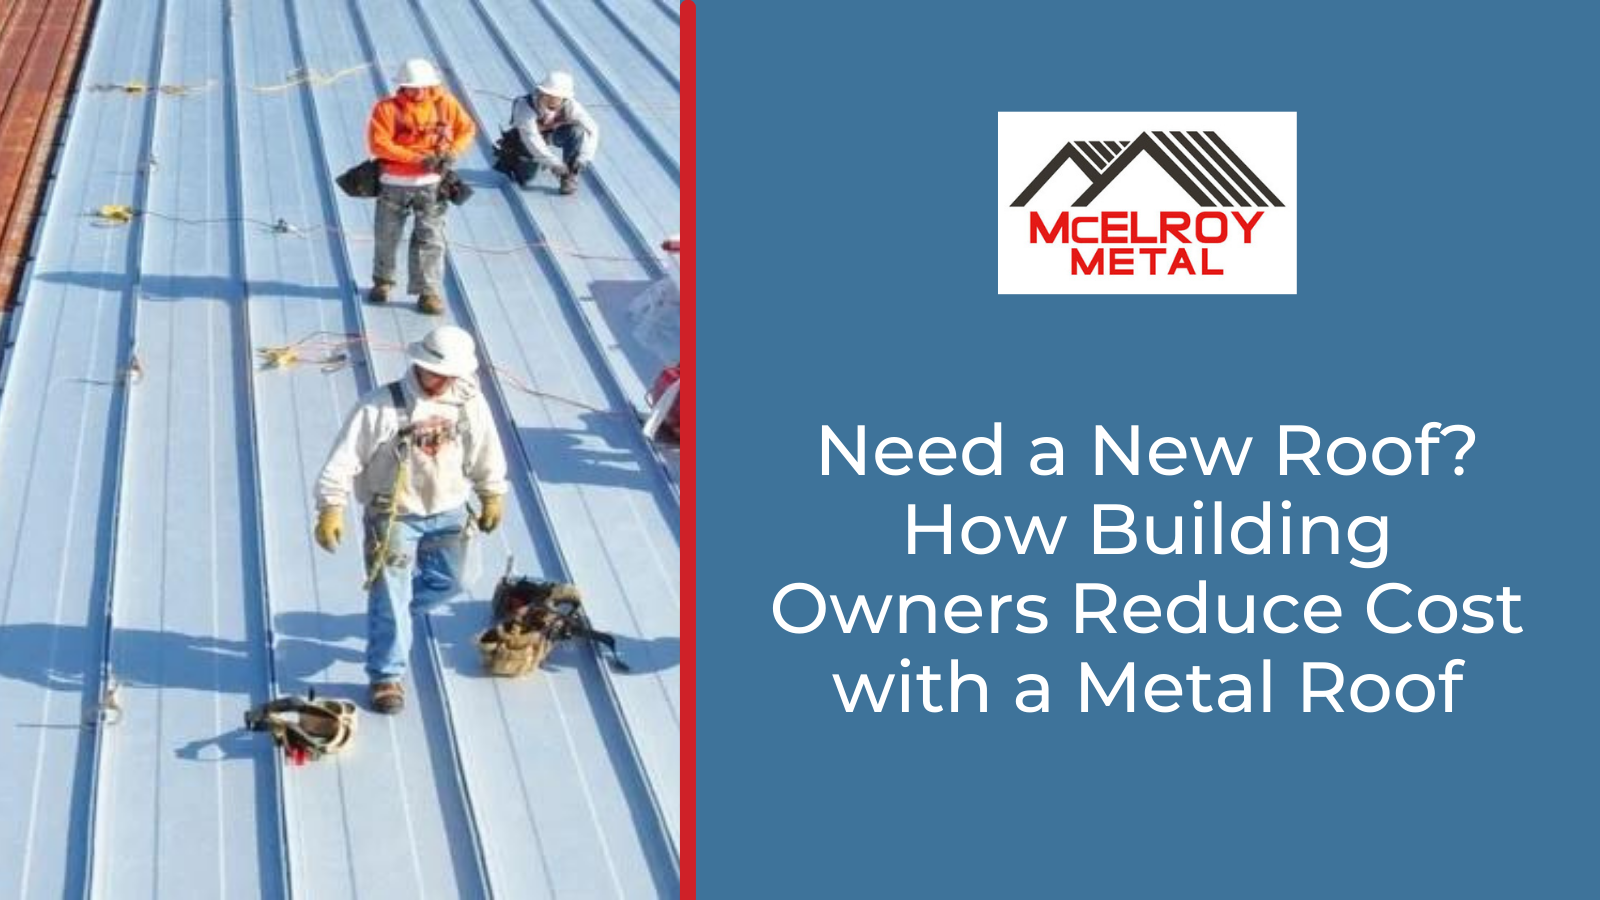 Need a New Roof? How Building Owners Reduce Cost with a Metal Roof